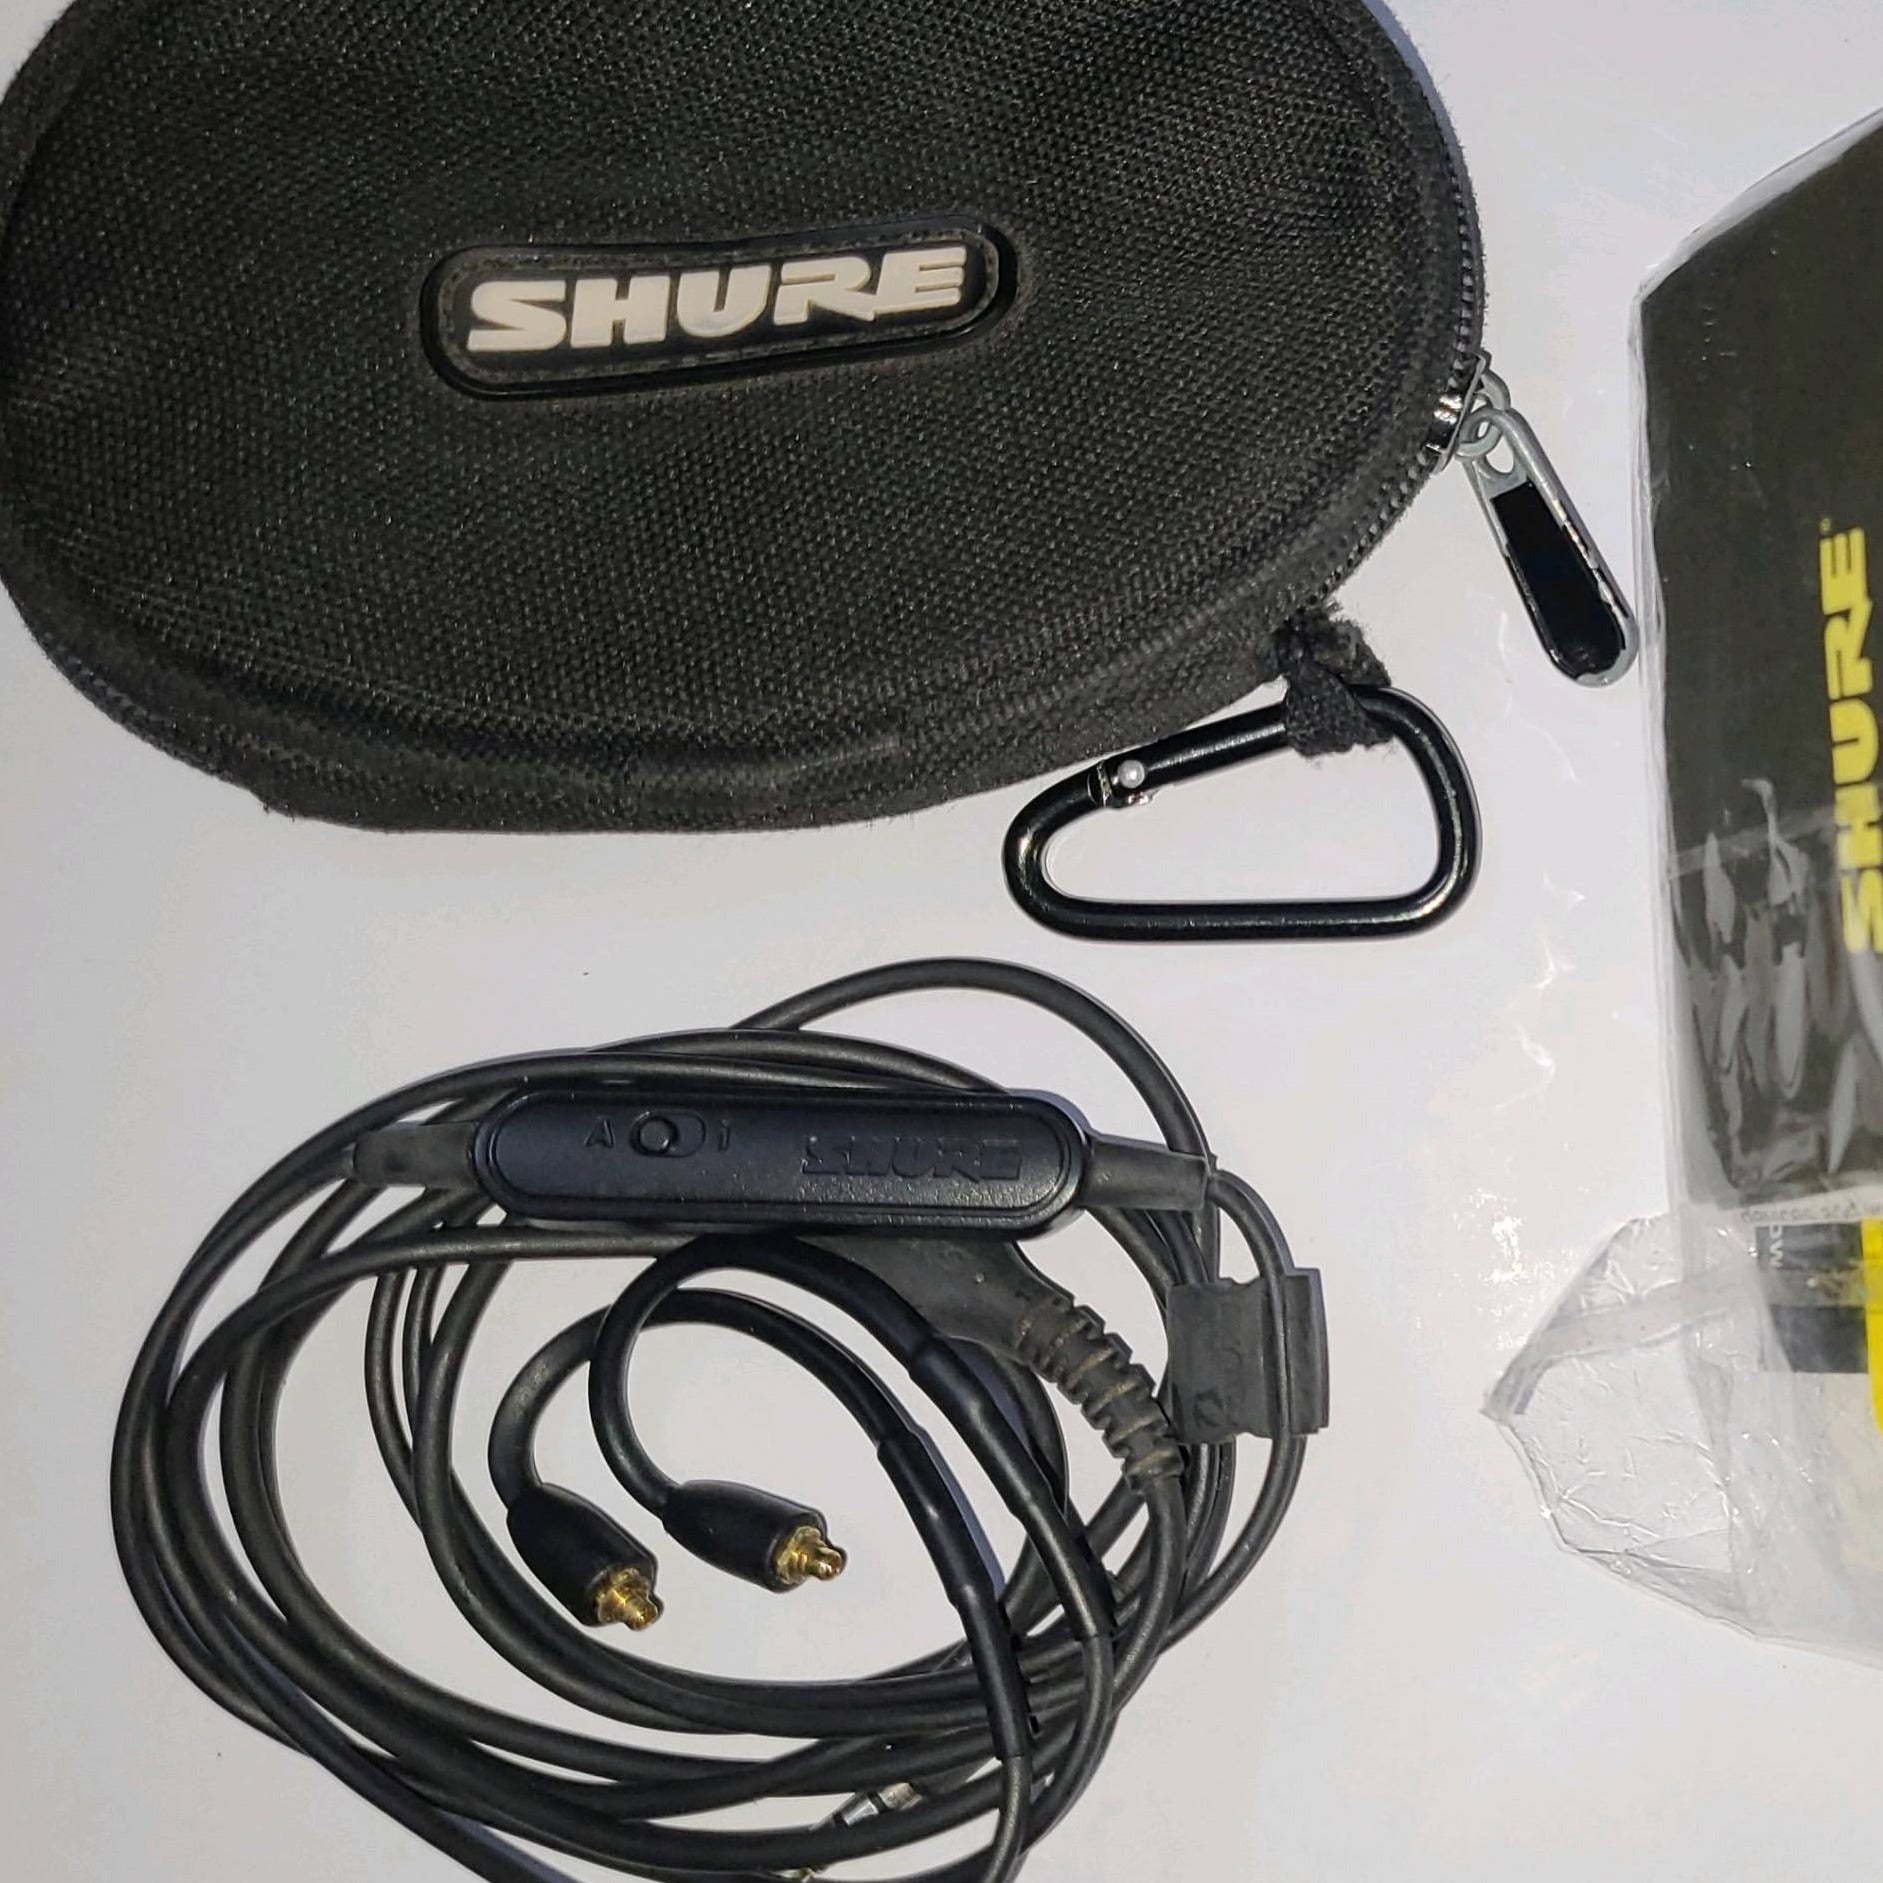 Shure - SE215 (Special Edition) (Pre-Owned)